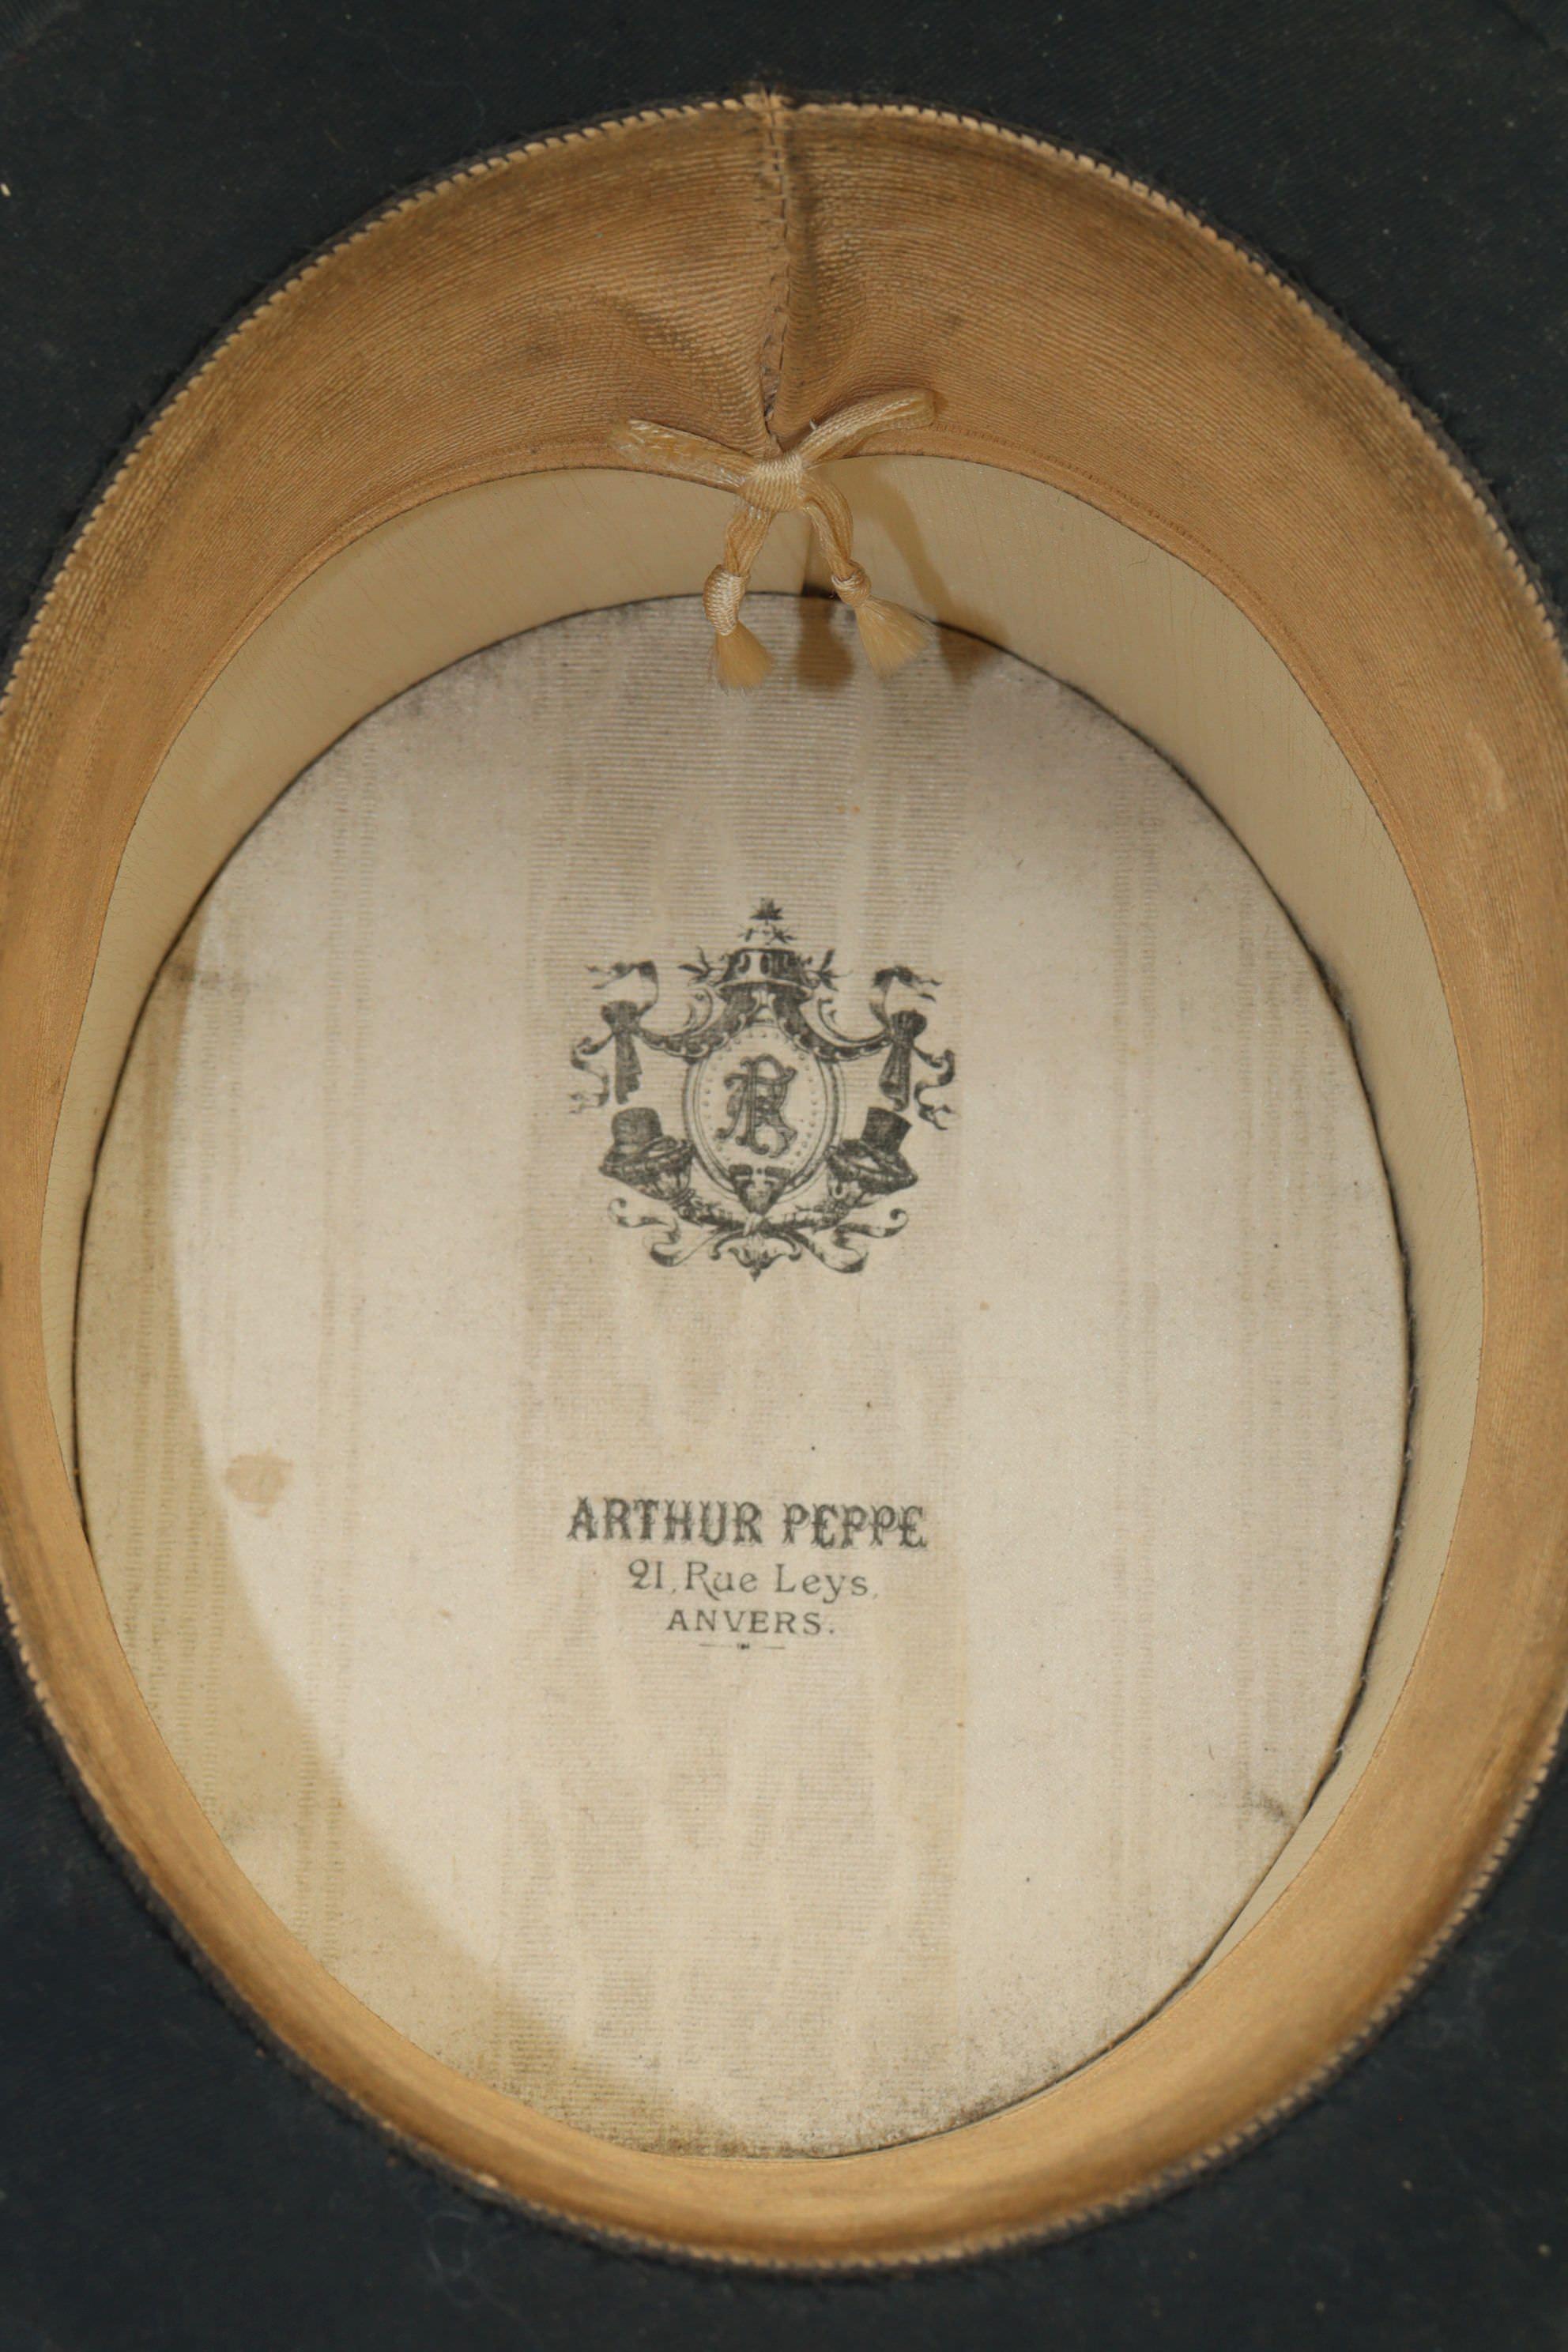 This silk top hat is housed in its original cardboard travelling case. It was made by Arthur Peppe of 23 Rue Leys in Anvers, which is the name given to Antwerp by French speakers. The makers mark on the inside of the hat is printed on watered silk